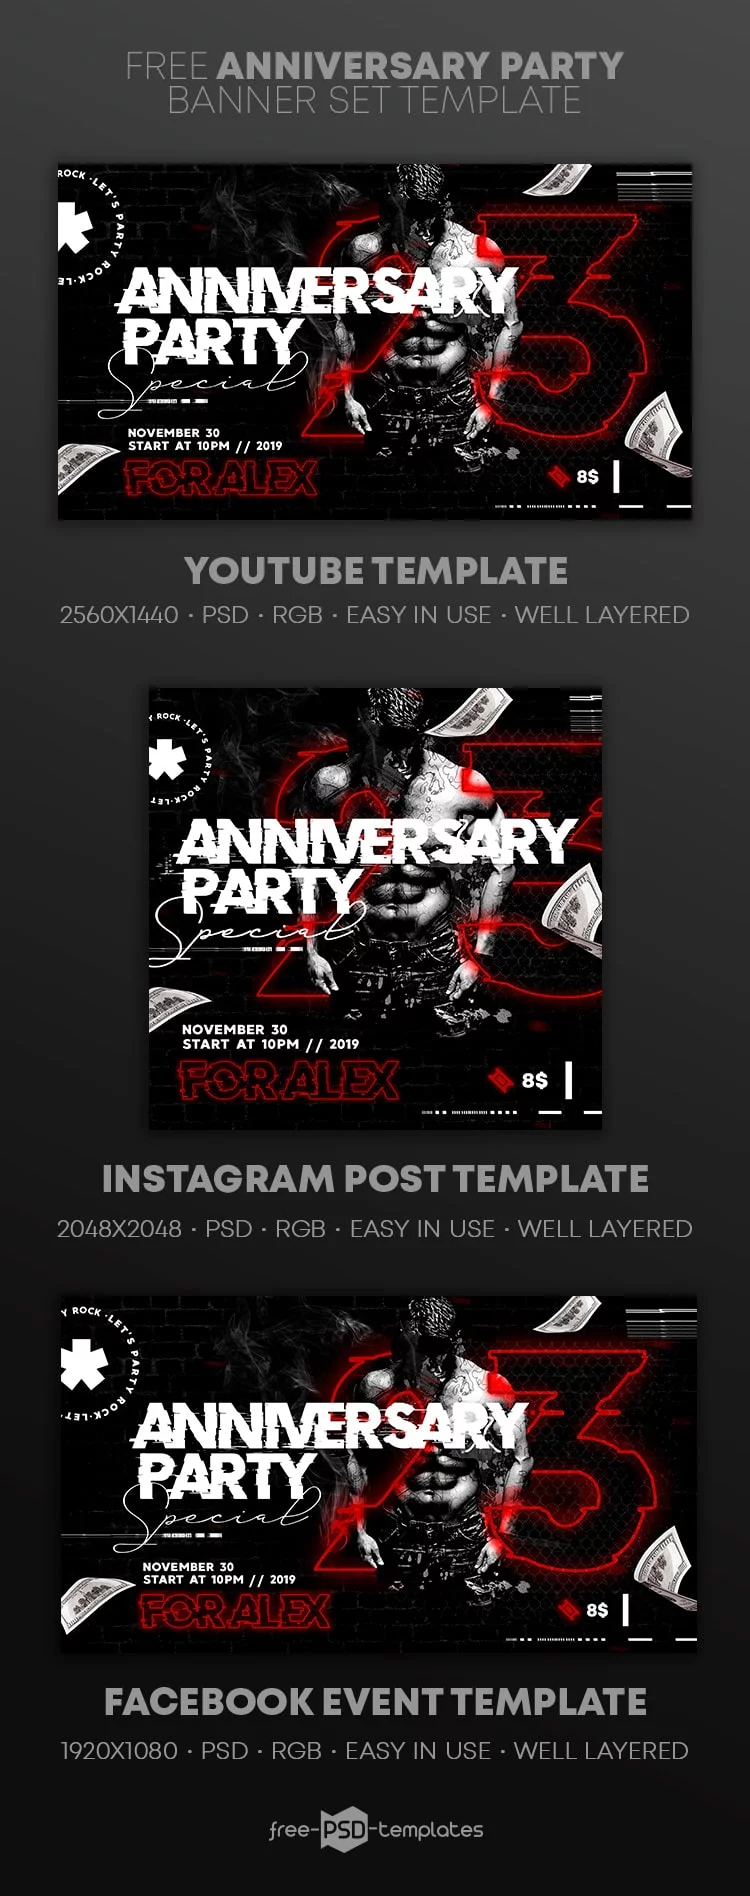 Free Anniversary Party Banner Set Template